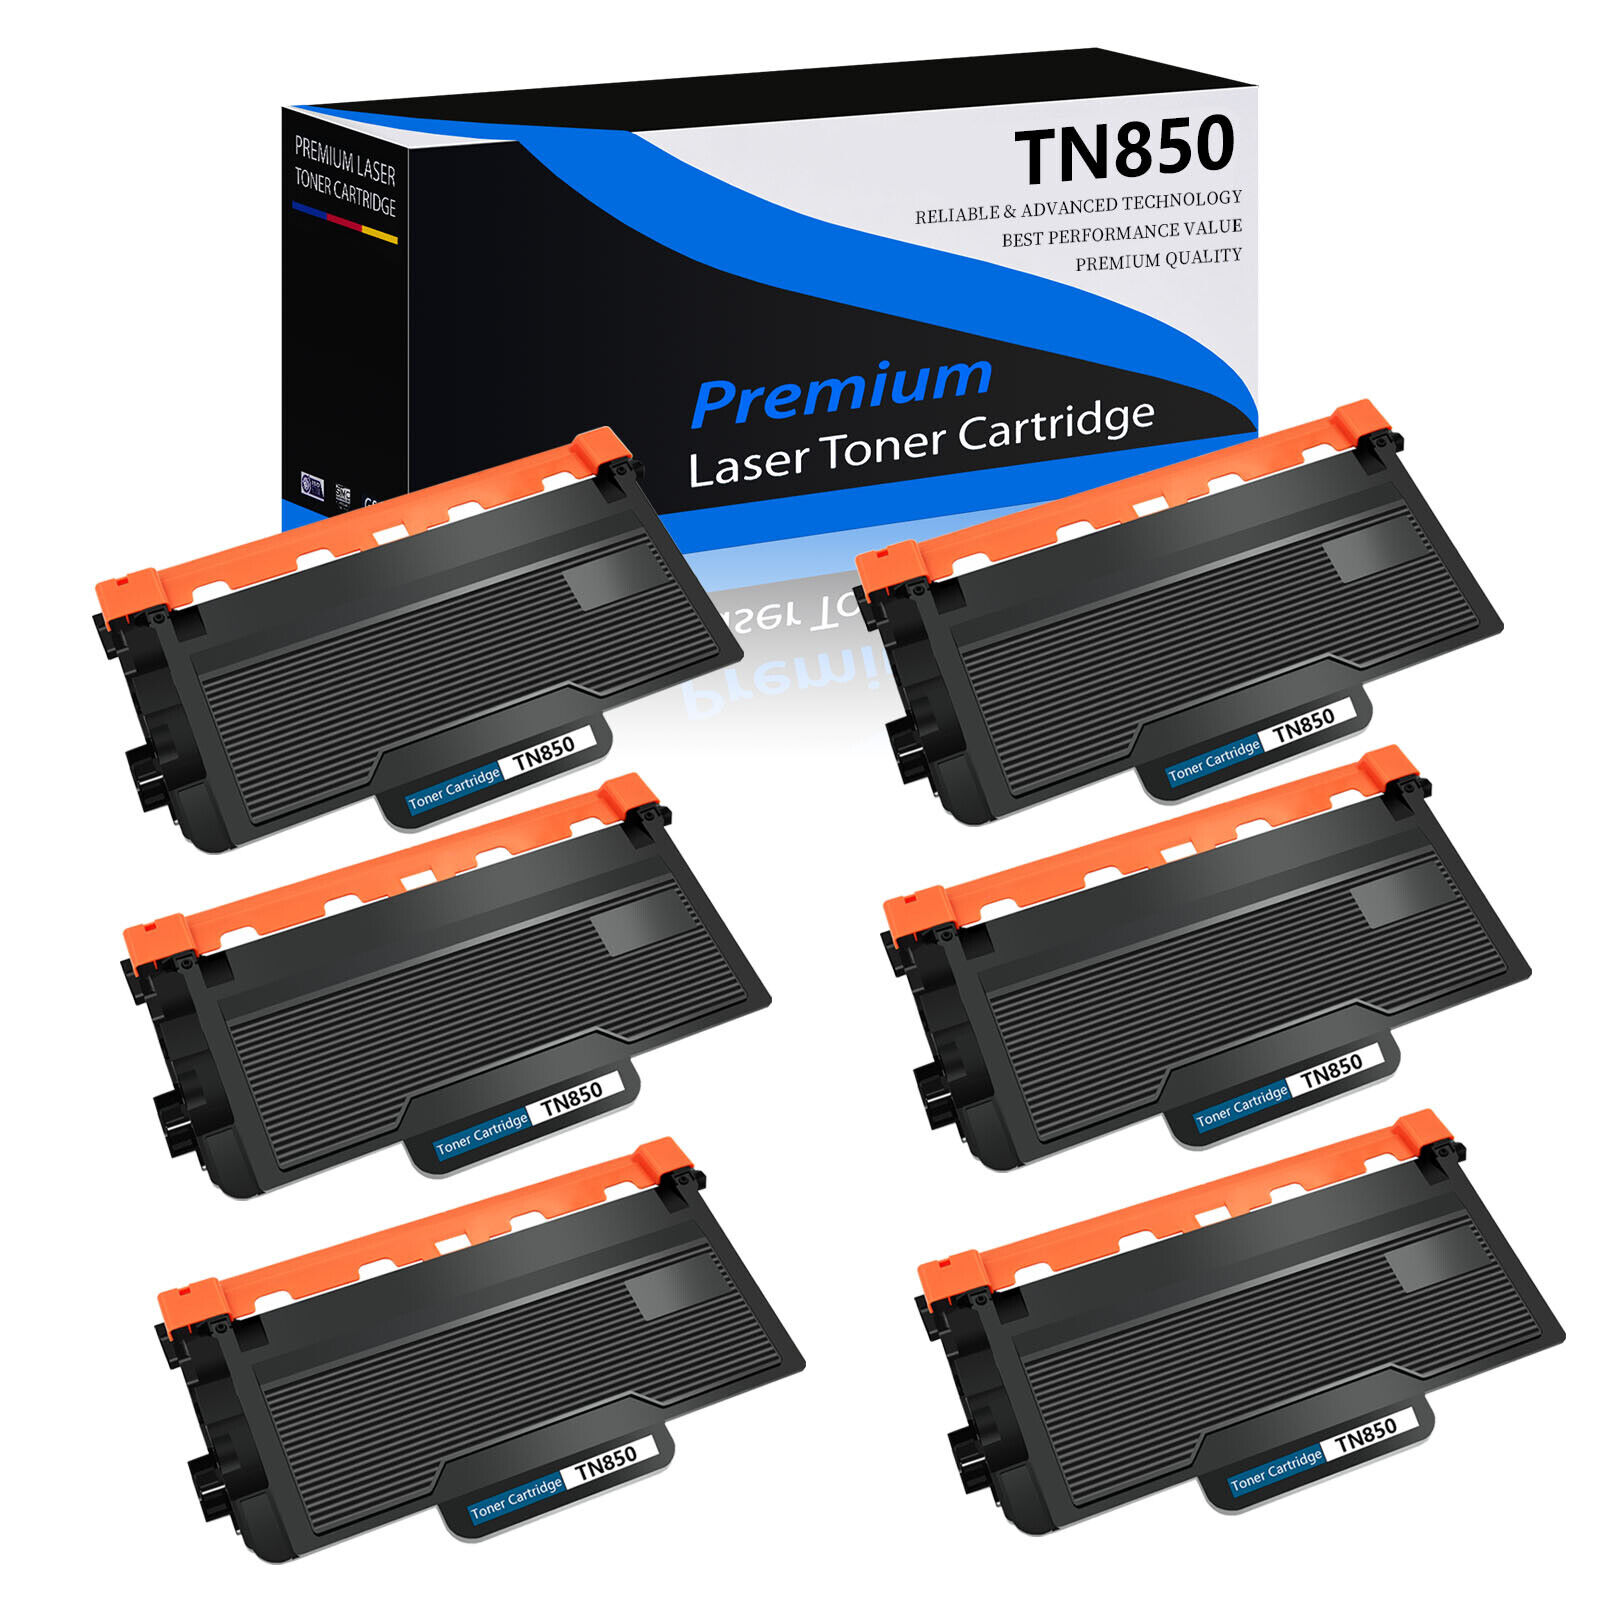 6PK TN850 Toner Cartridge for Brother DCP-L5500DN DCP-L5600DN DCP-L5650DN